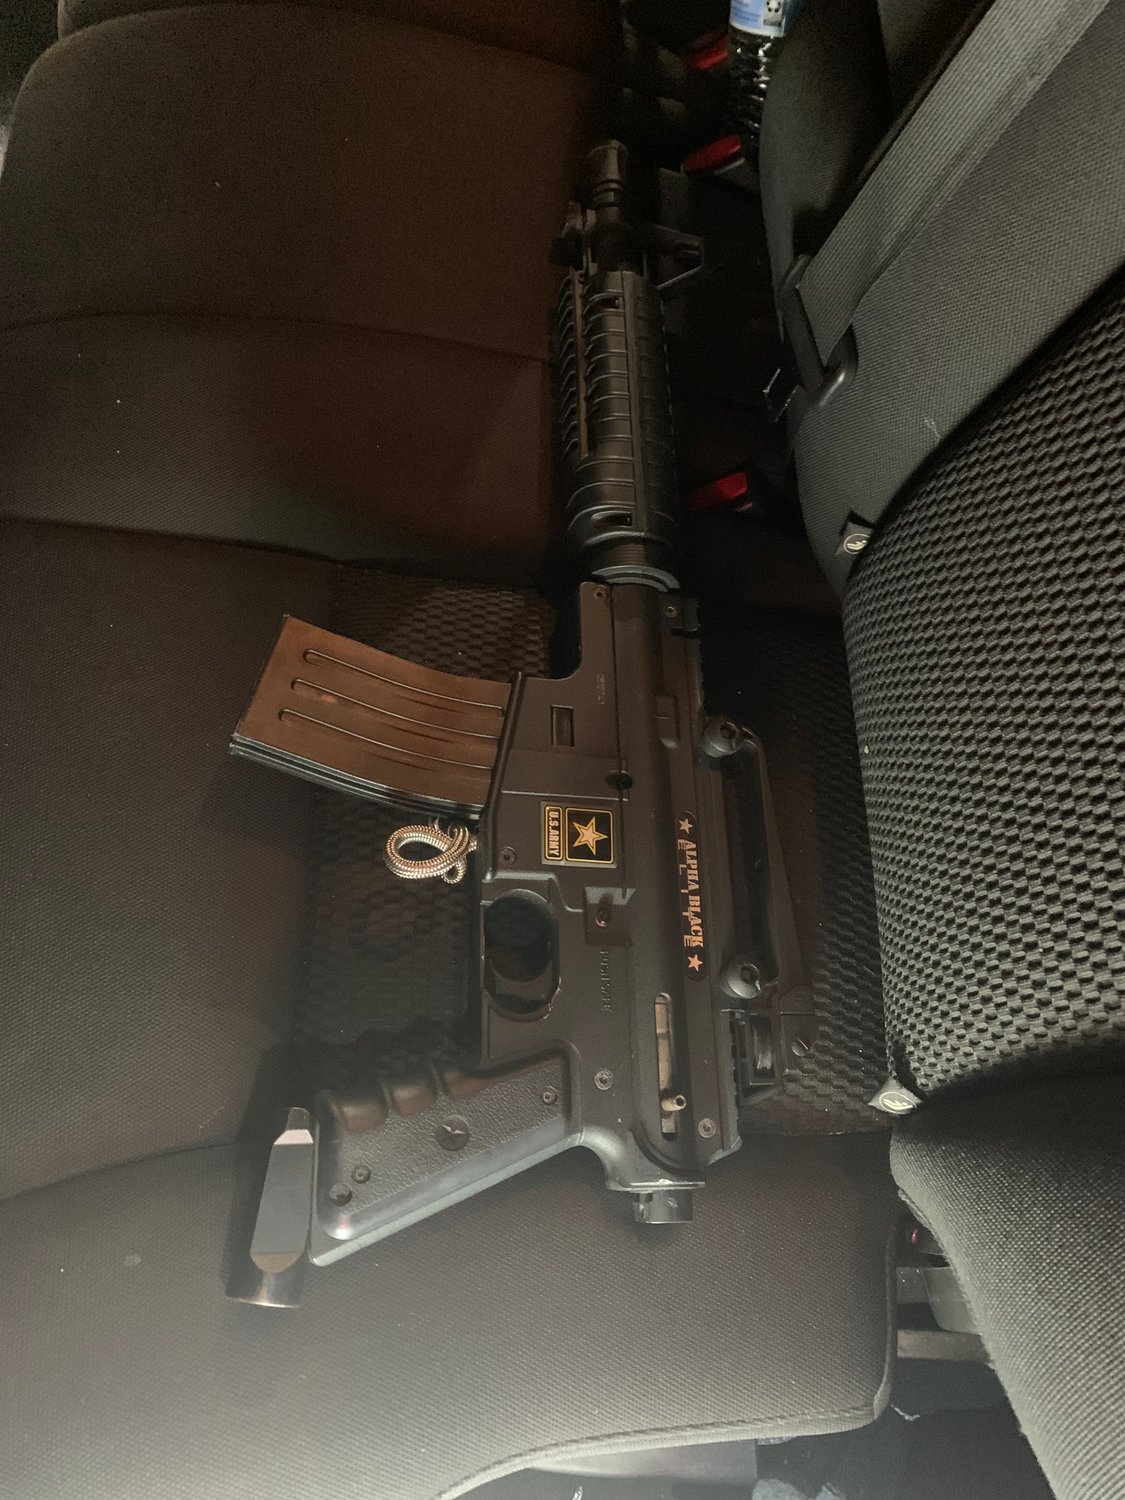 A modified paintball gun, styled as an AR-15 rifle, was found in the back seat of the suspect's vehicle by police Dec. 1.